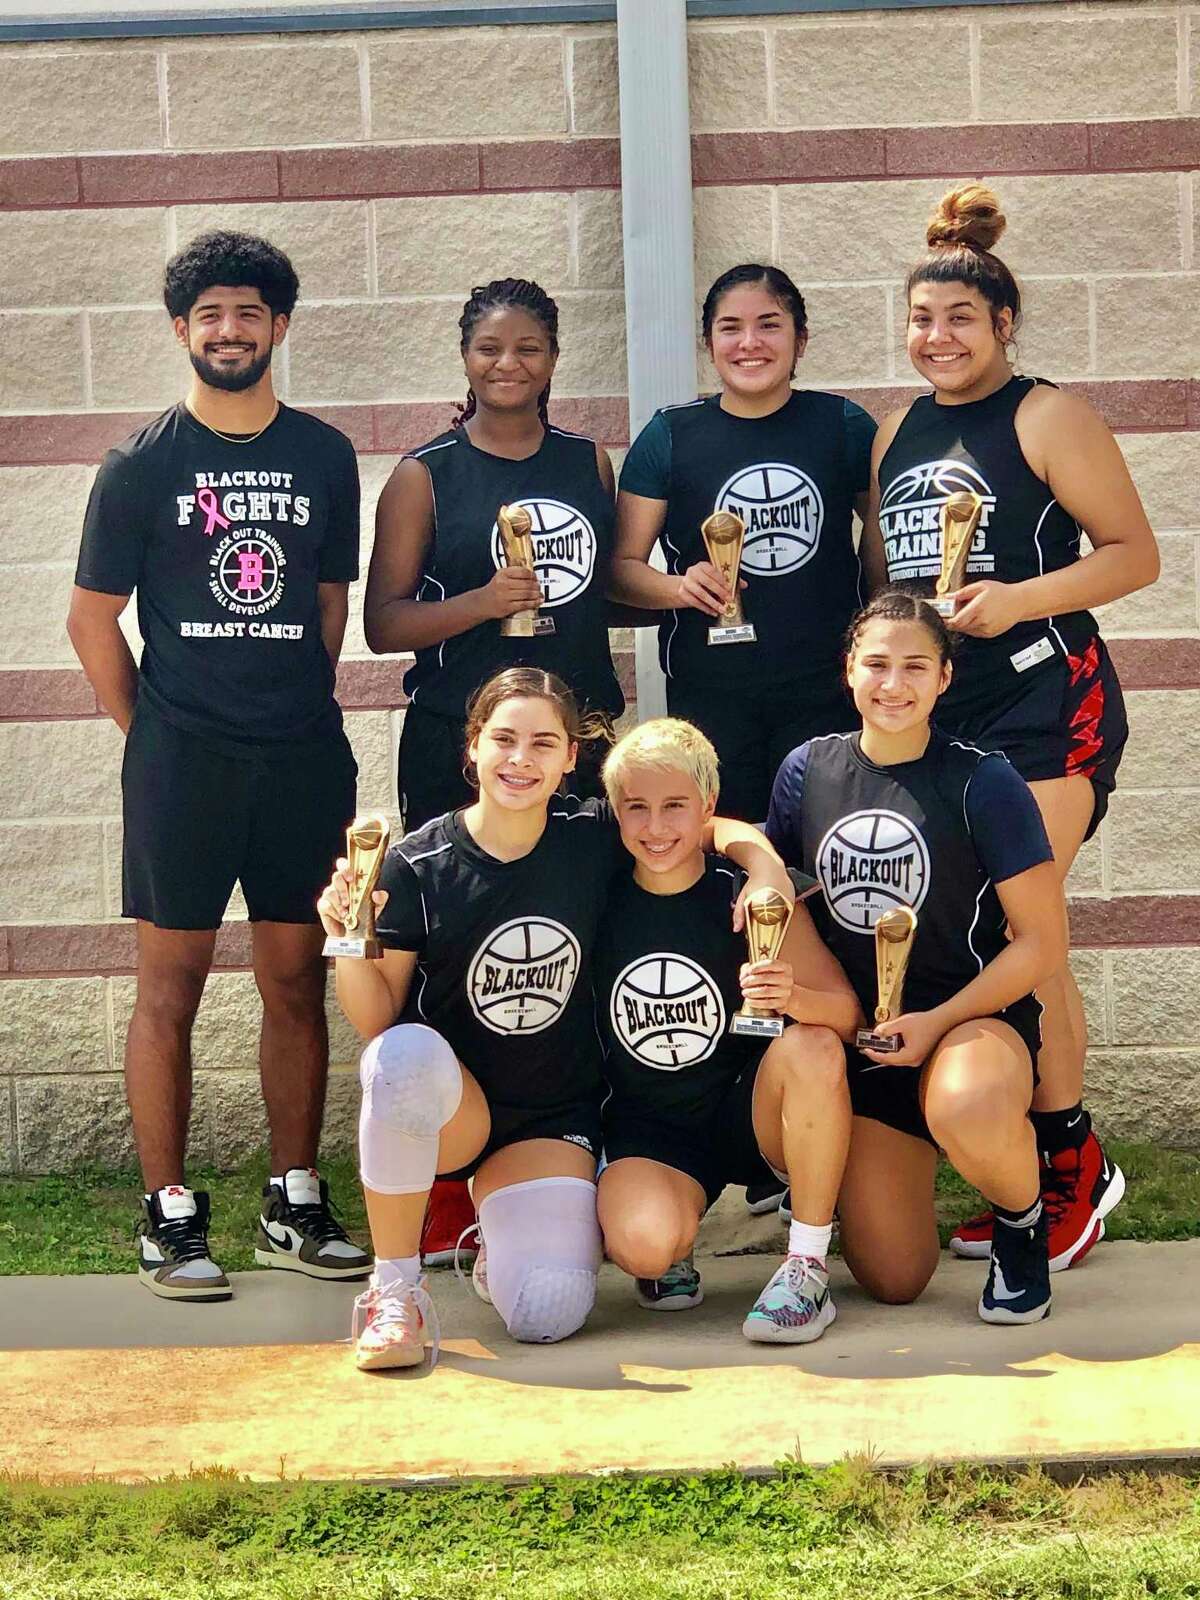 Blackout went 3-0 over the weekend to win the September Showcase Basketball Tournament in San Antonio. Pictured in the back row are coach Matthew Duron, Genesis De La Cruz, Sophia Villalobos and Melanie Duron, and in the front are Evelyn Quiroz, Dezerae De La Garza and Kayla Herrera.